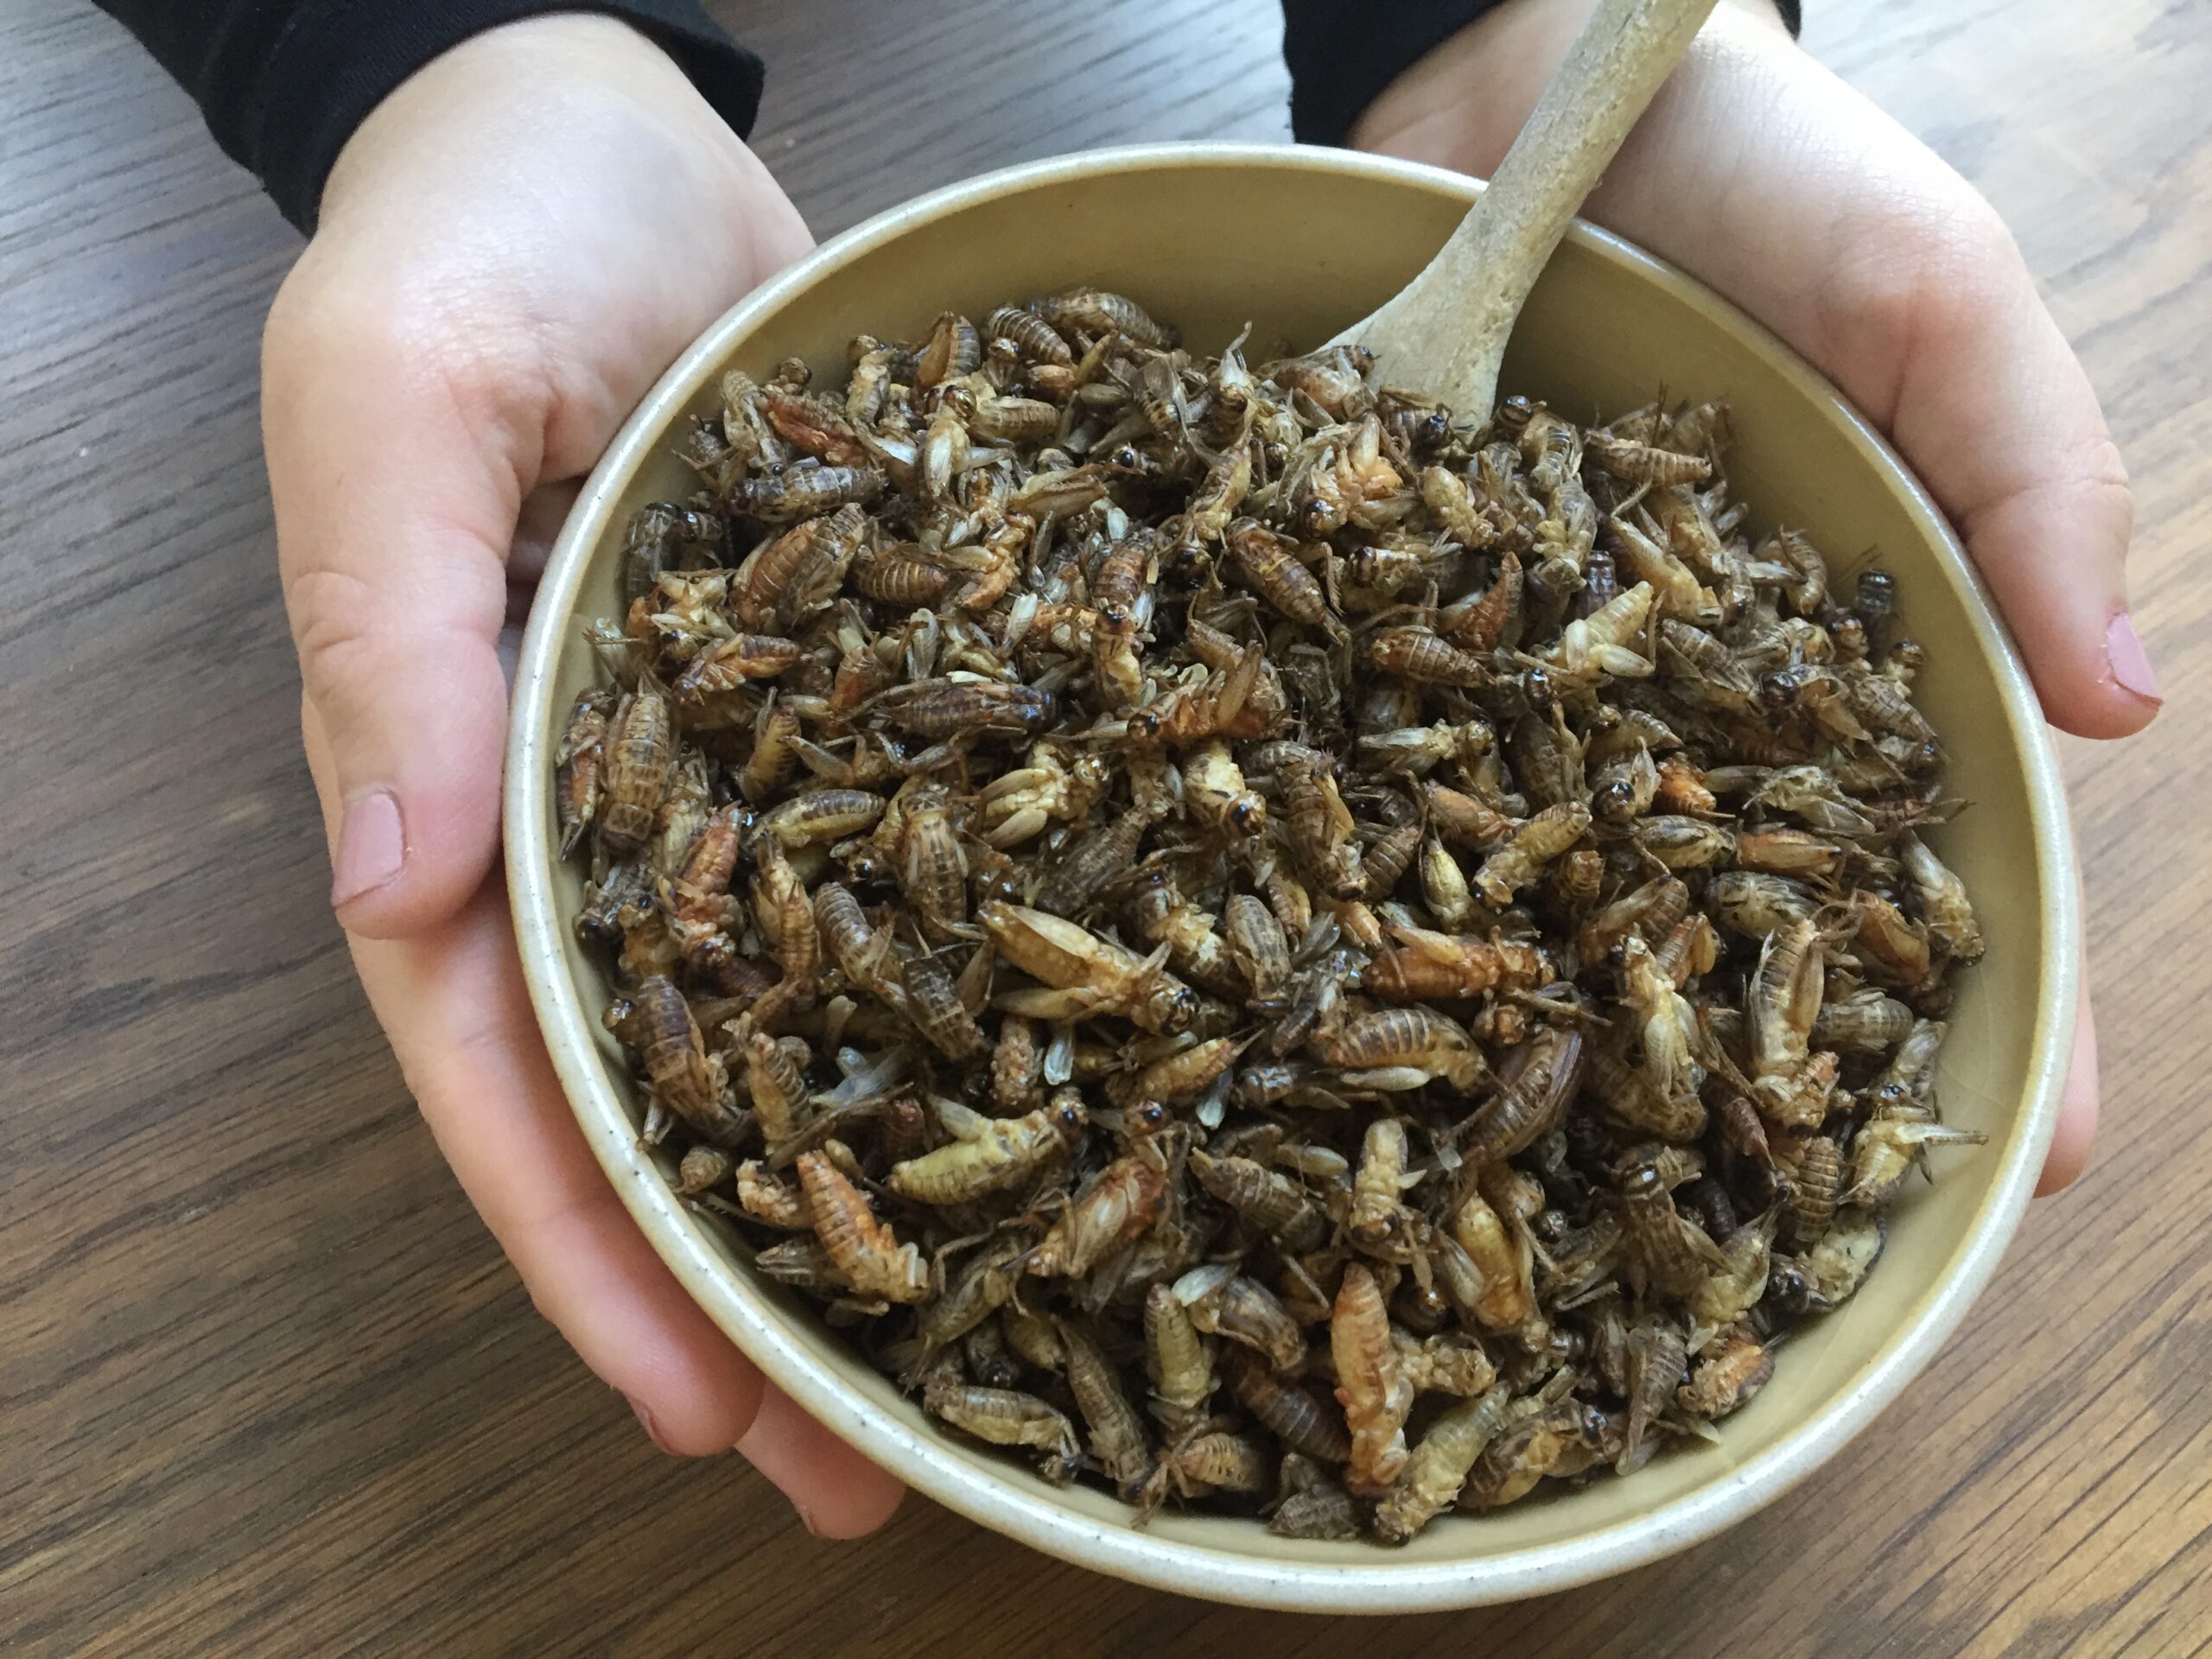 Edible insects - crickets